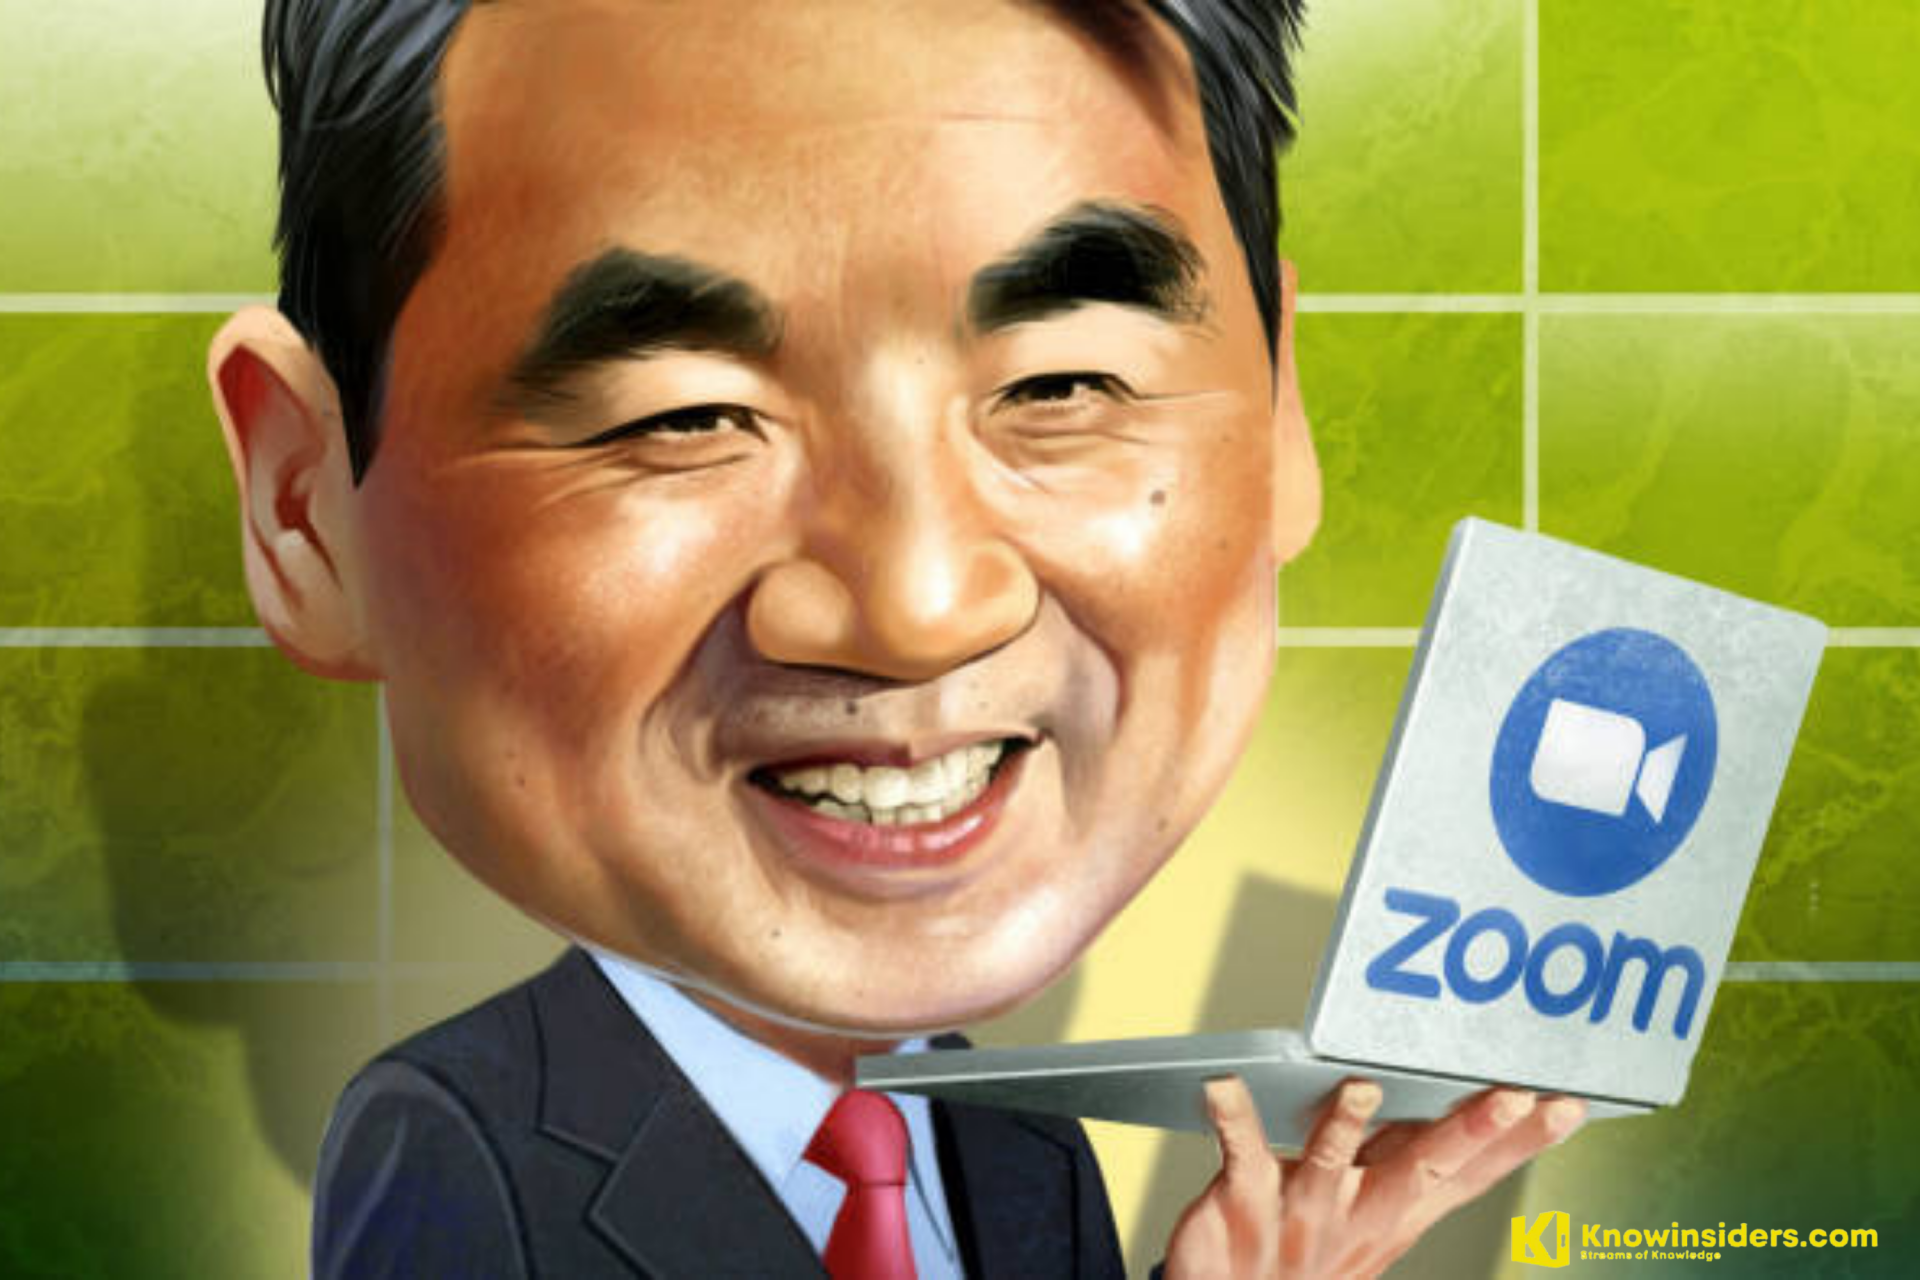 Who is Eric Yuang: Bio, Career, and Zoom Empir